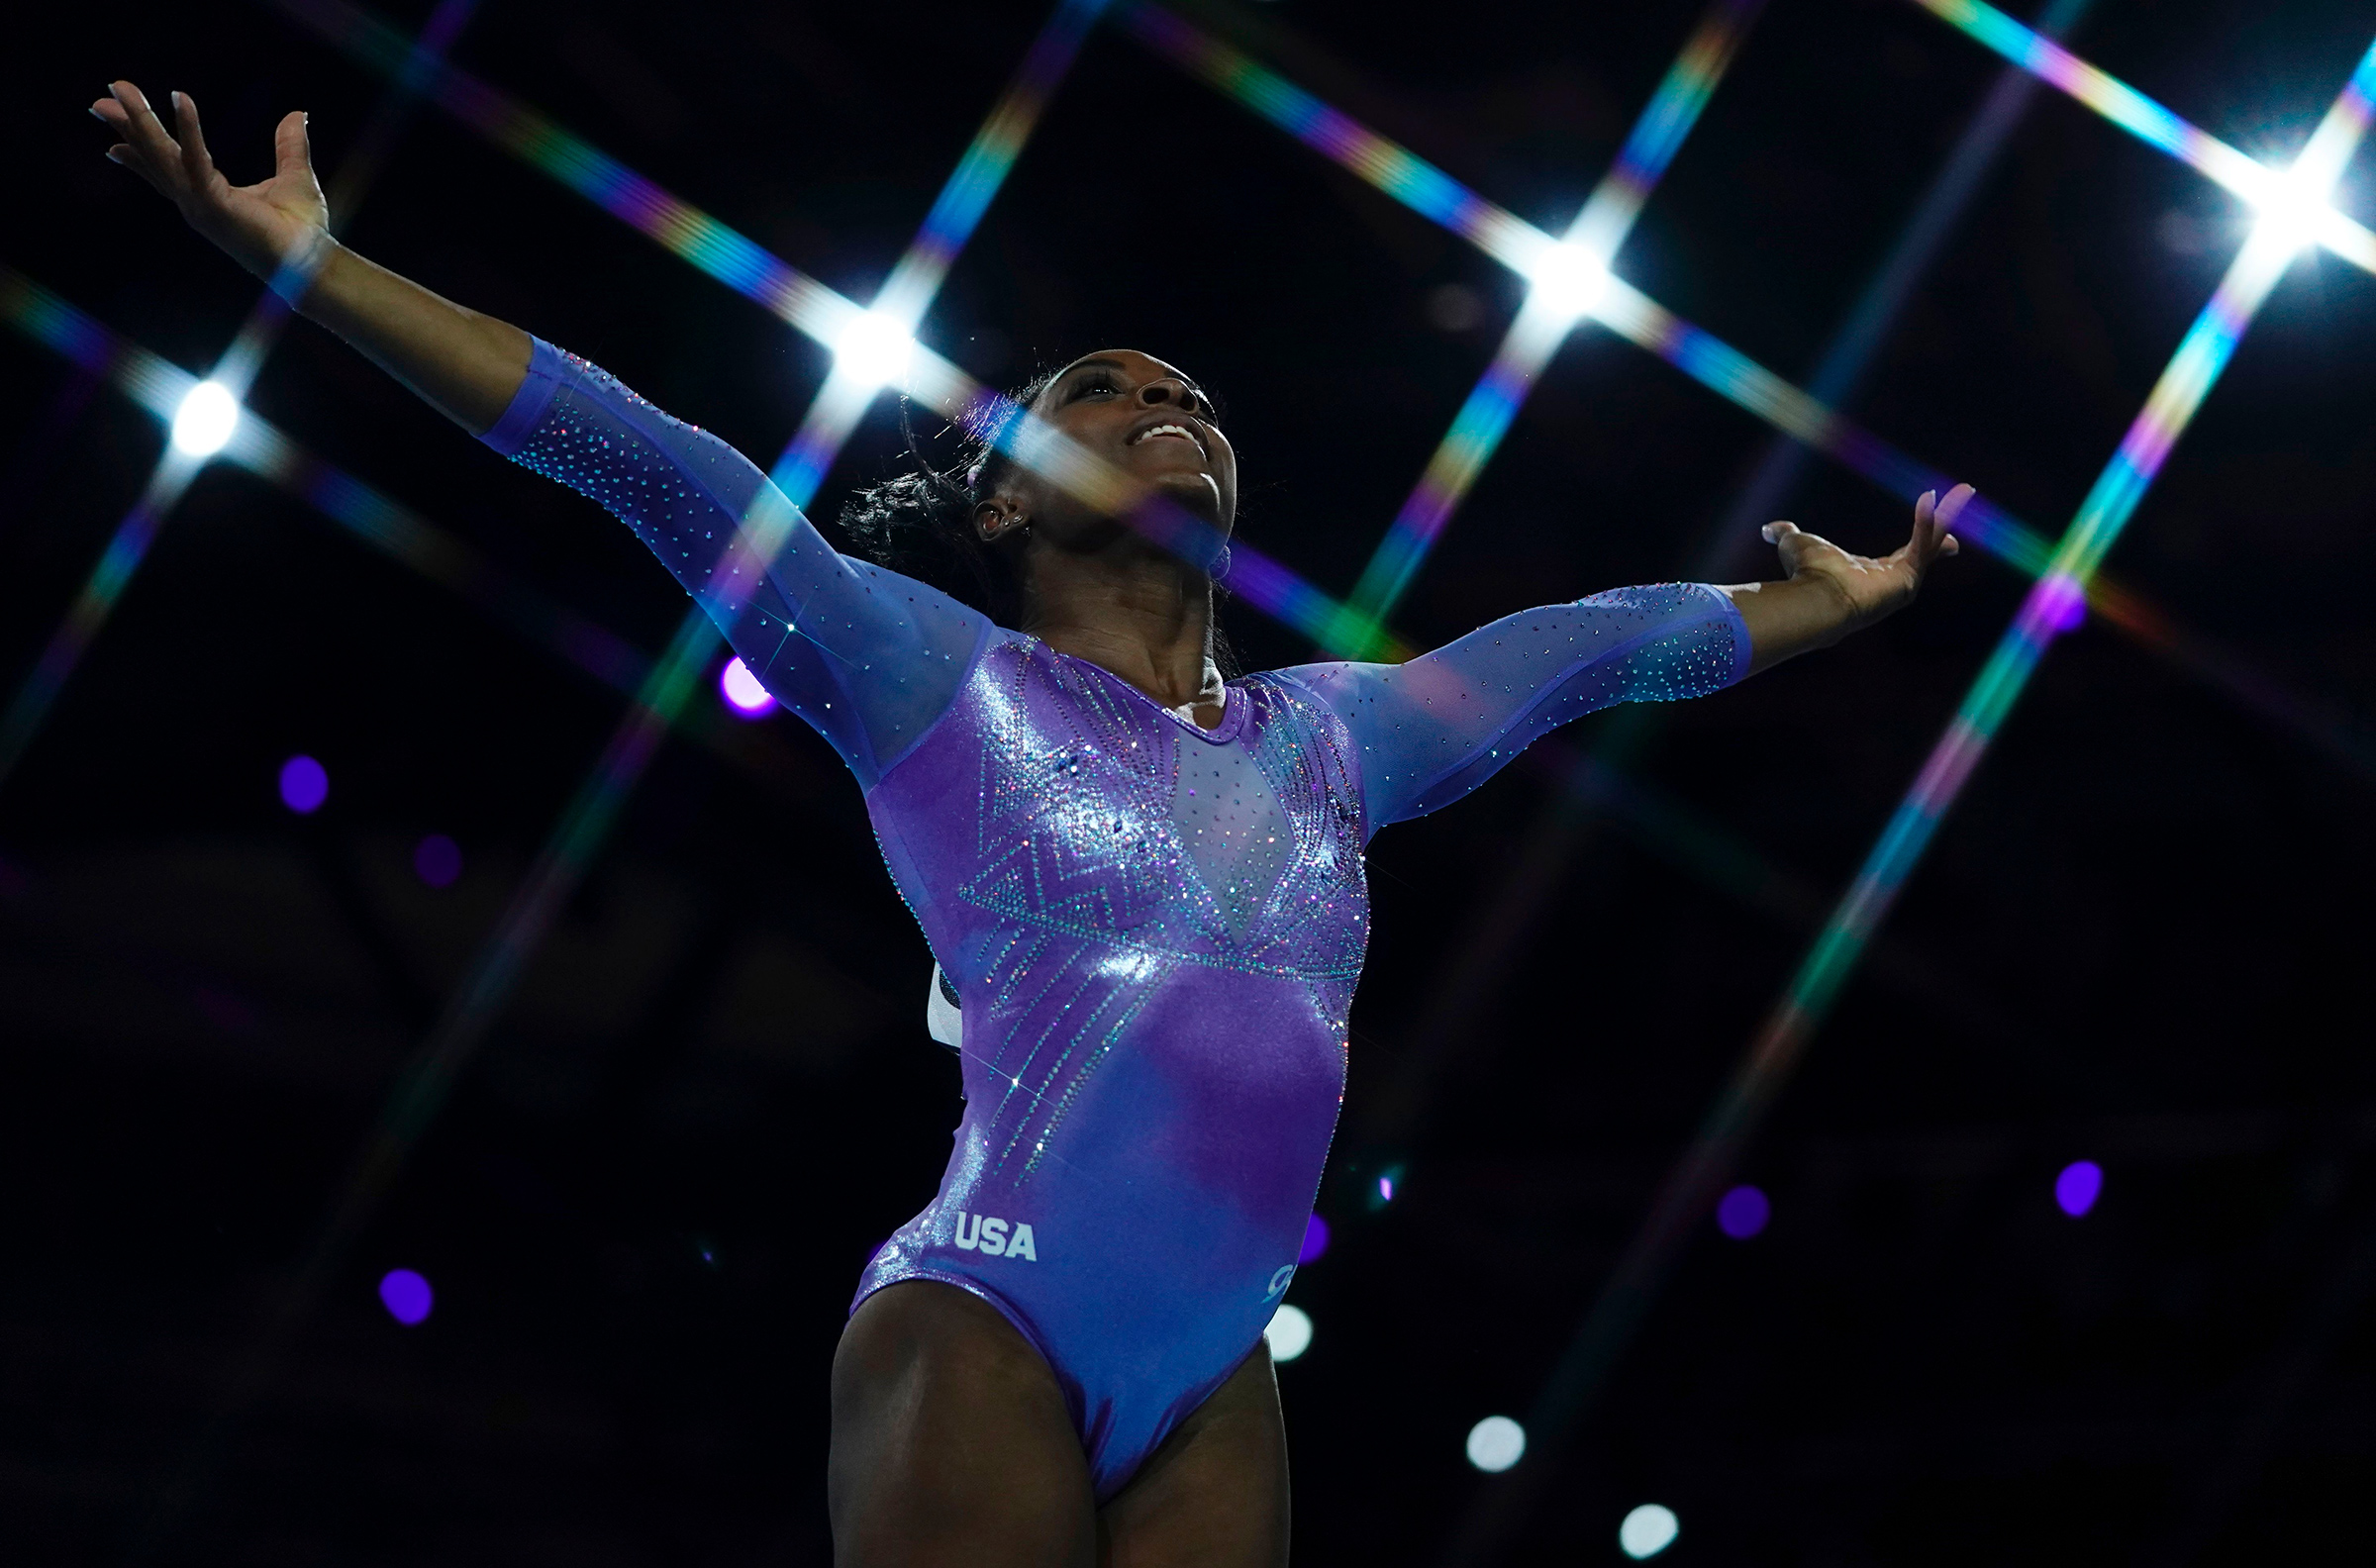 USA's Simone Biles performs during the apparatus finals at the FIG Artistic Gymnastics World Championships in Stuttgart, Germany, on Oct. 13, 2019.